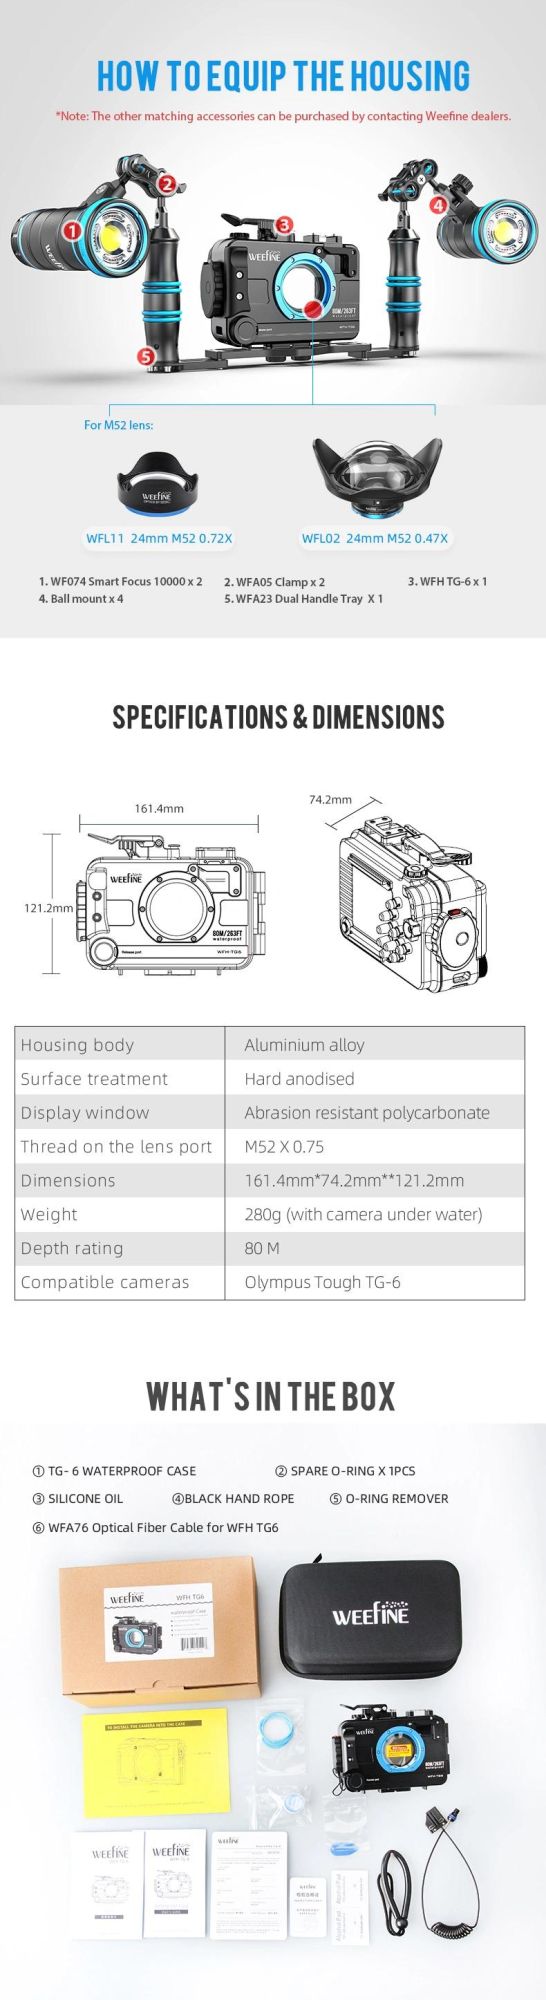 Wear-Resistant Corrosion-Ressistant High Quality Aluminum Camera Housing for Diving Underwater Photography